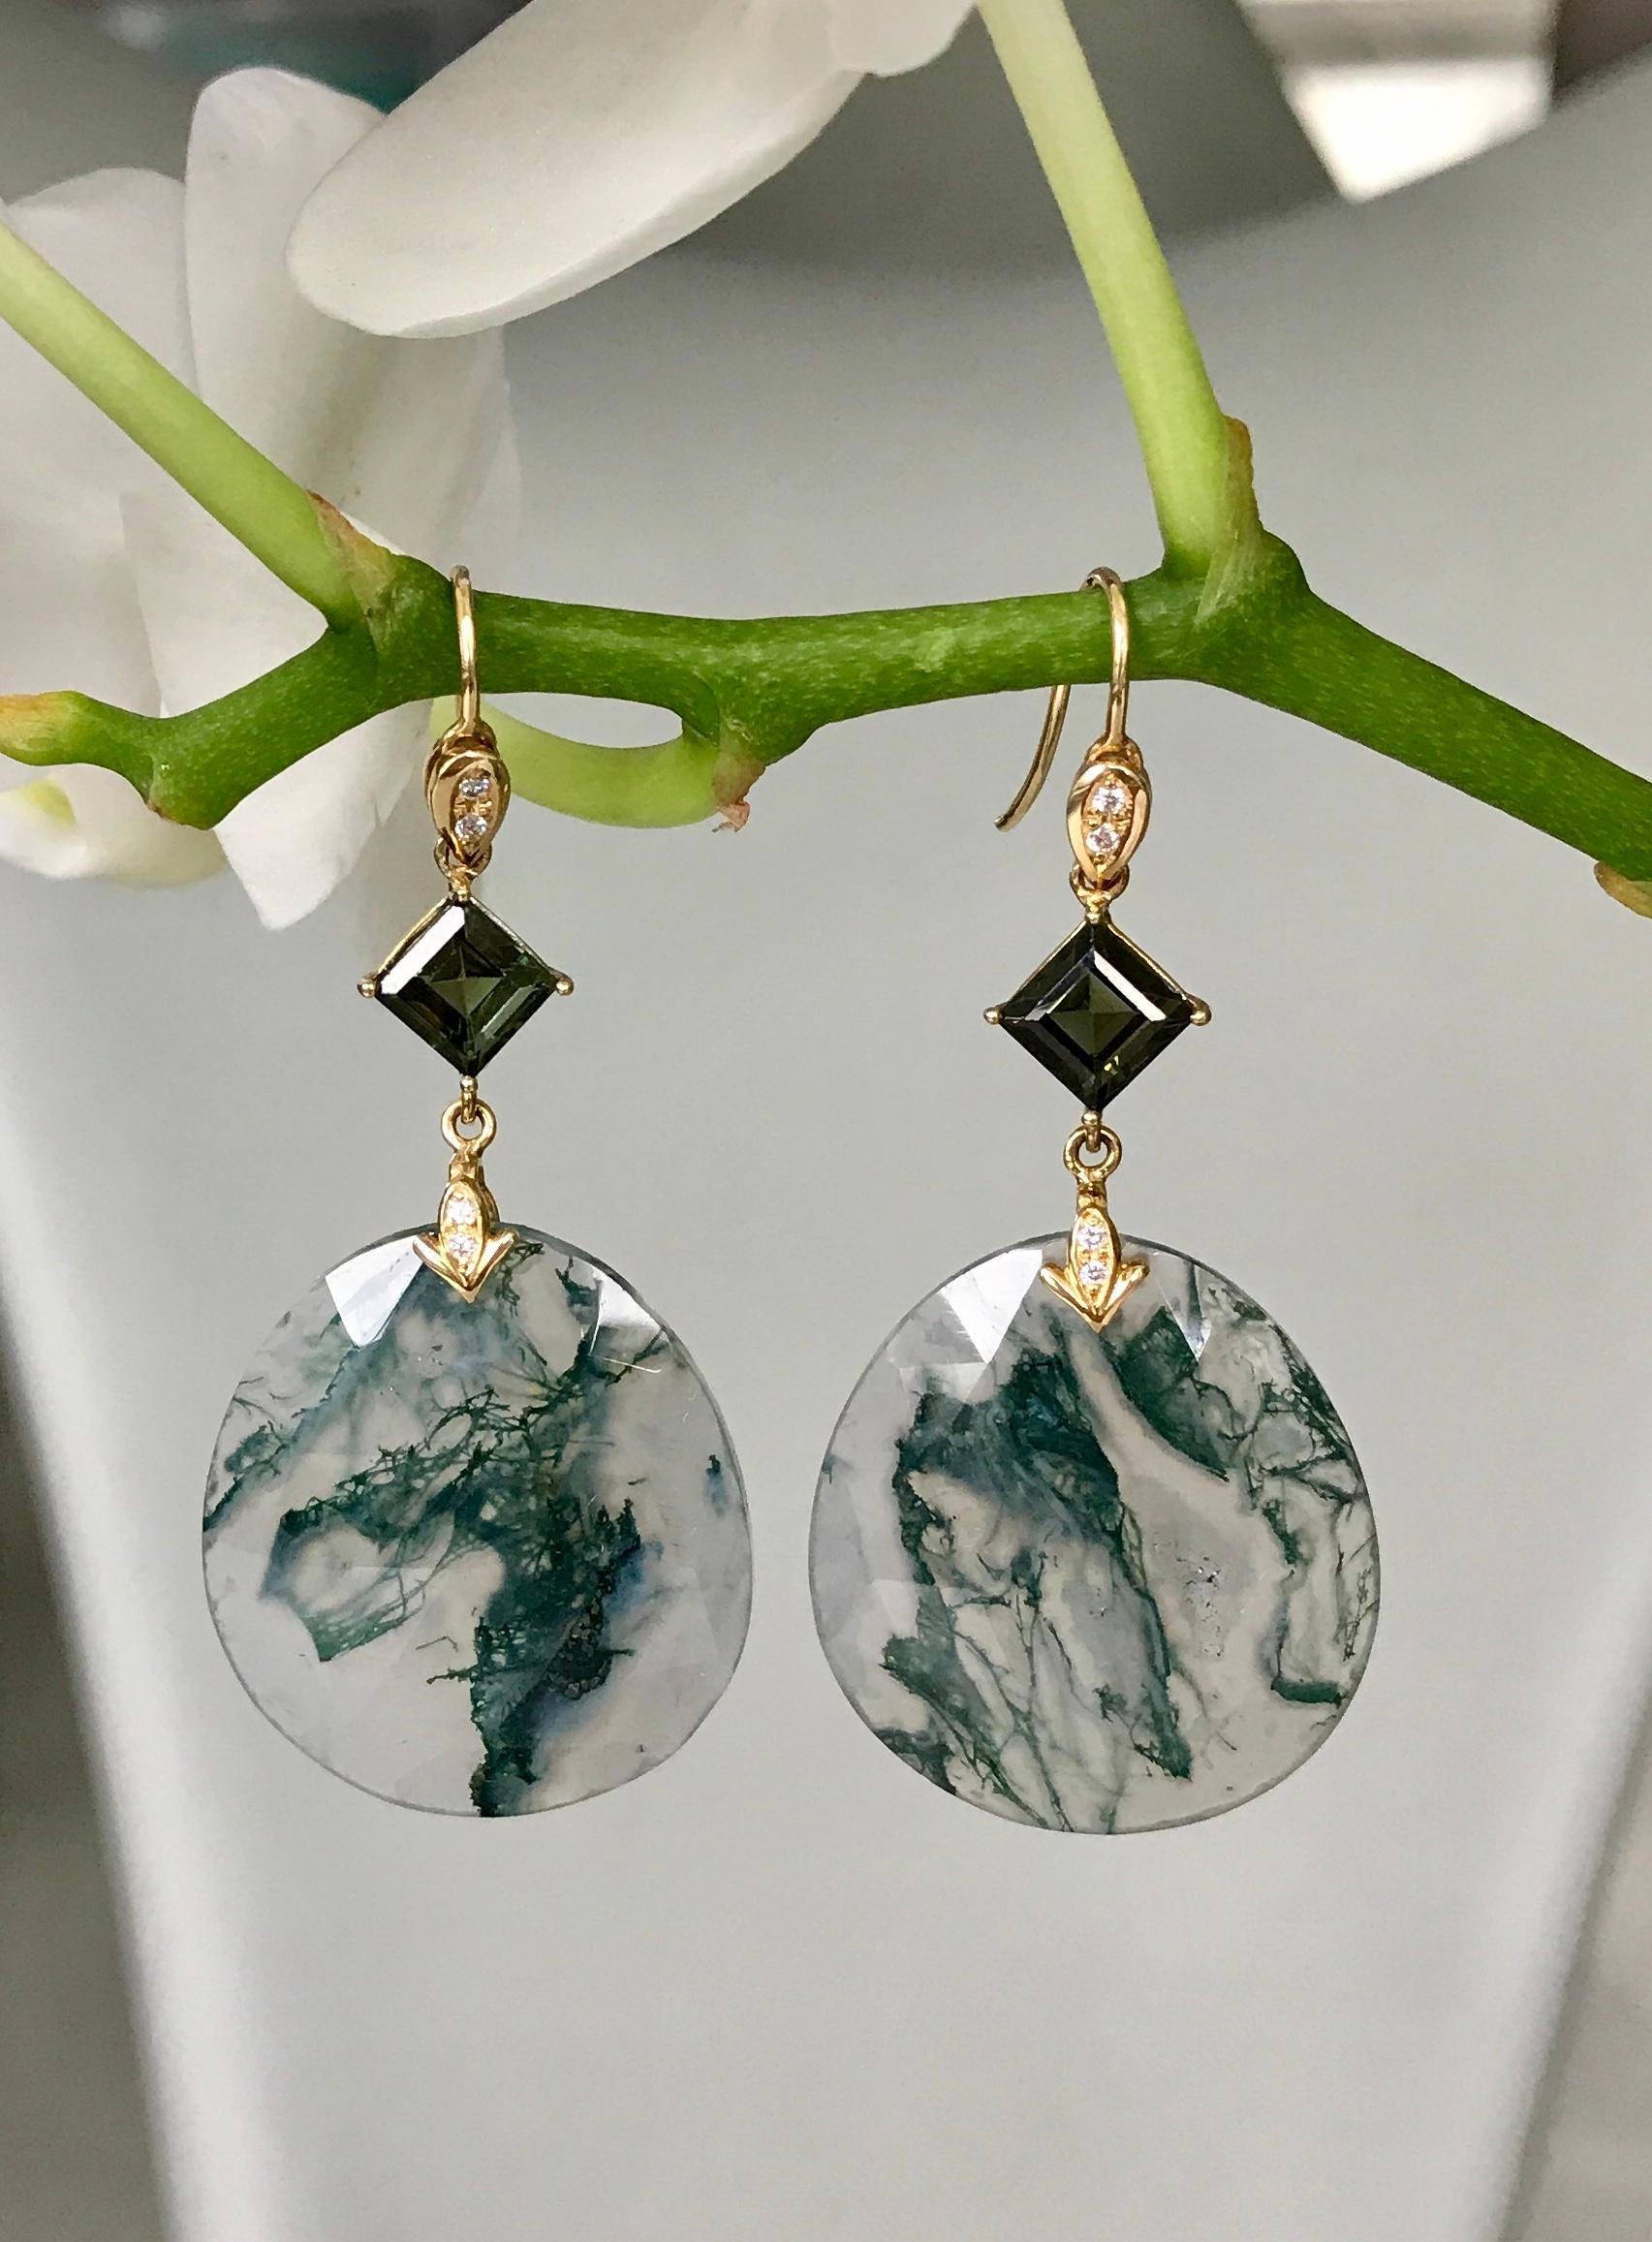 One-of-a-kind dangle earrings with moss agates, green tourmalines and diamonds, handcrafted in 18 karat yellow gold.

These simply pretty earrings are like a beautiful canvas depicting natural moss in rose cut agate gemstones. Set simply with green